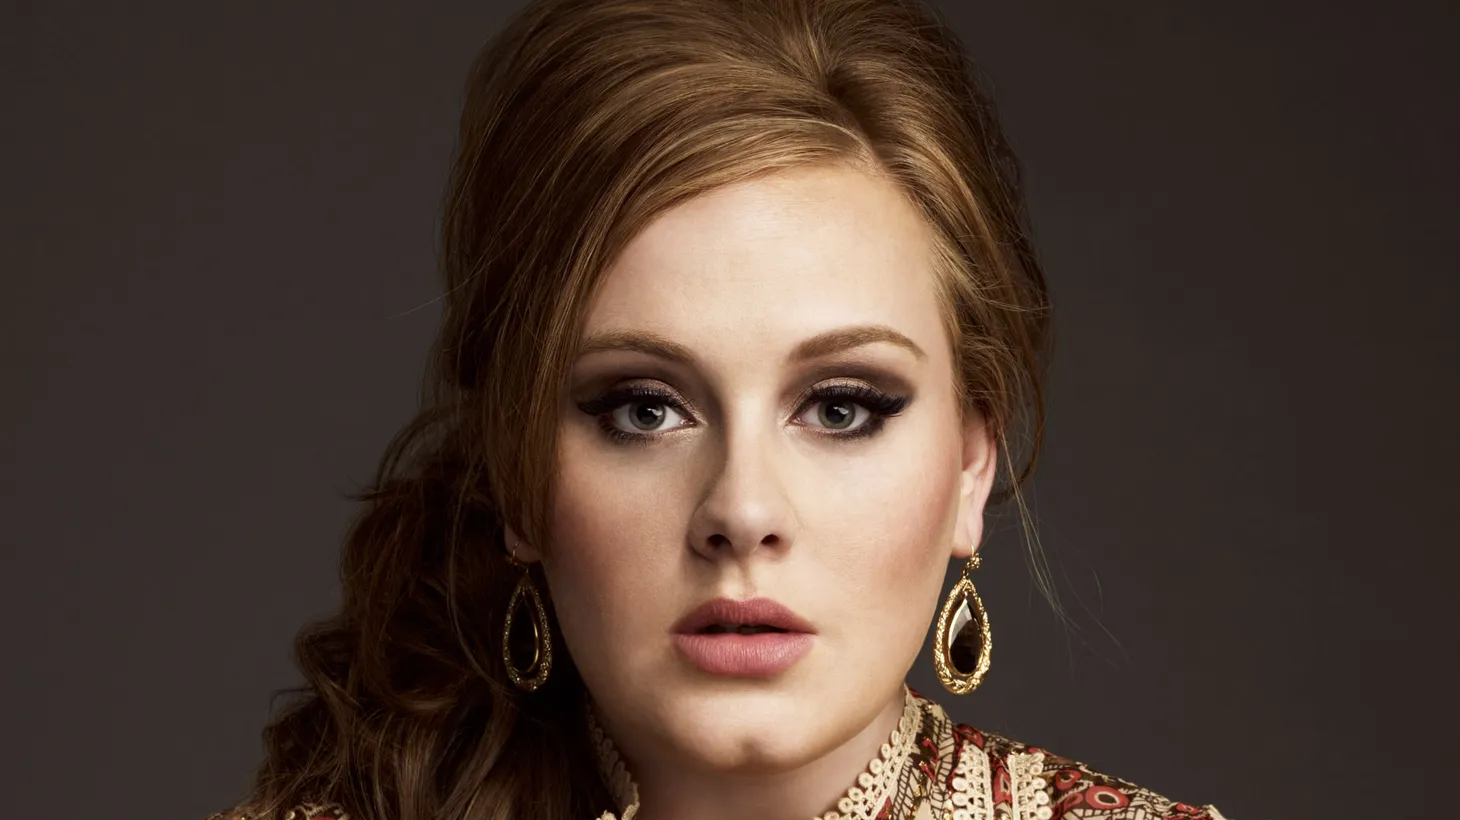 Adele's sophomore release 21 catapulted her to stardom. She visited our studio for a special session.